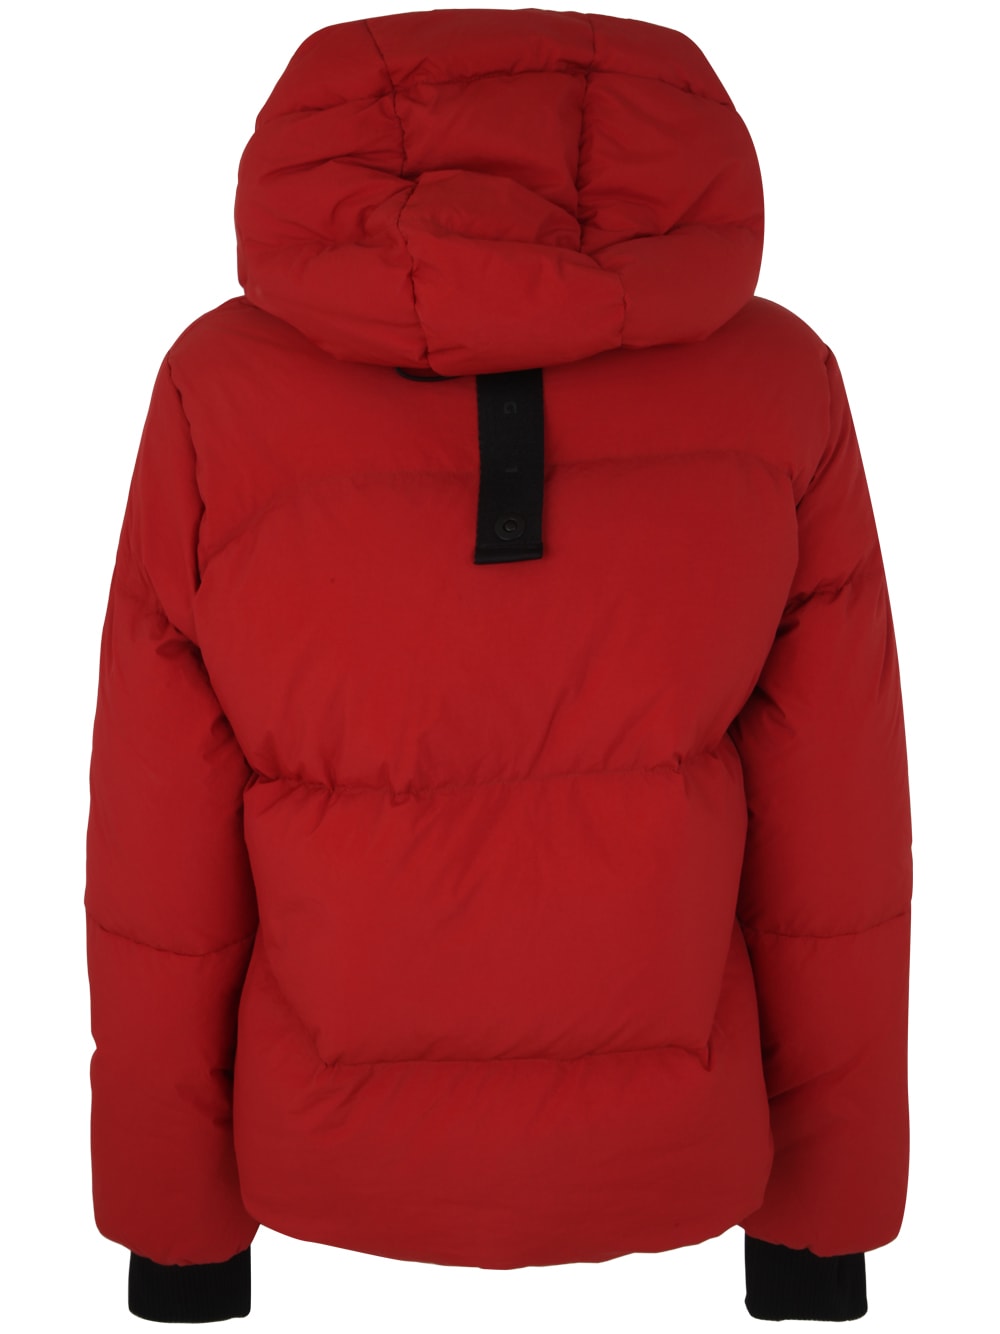 Shop Jg1 Padded Jacket With Hood In Red Burn